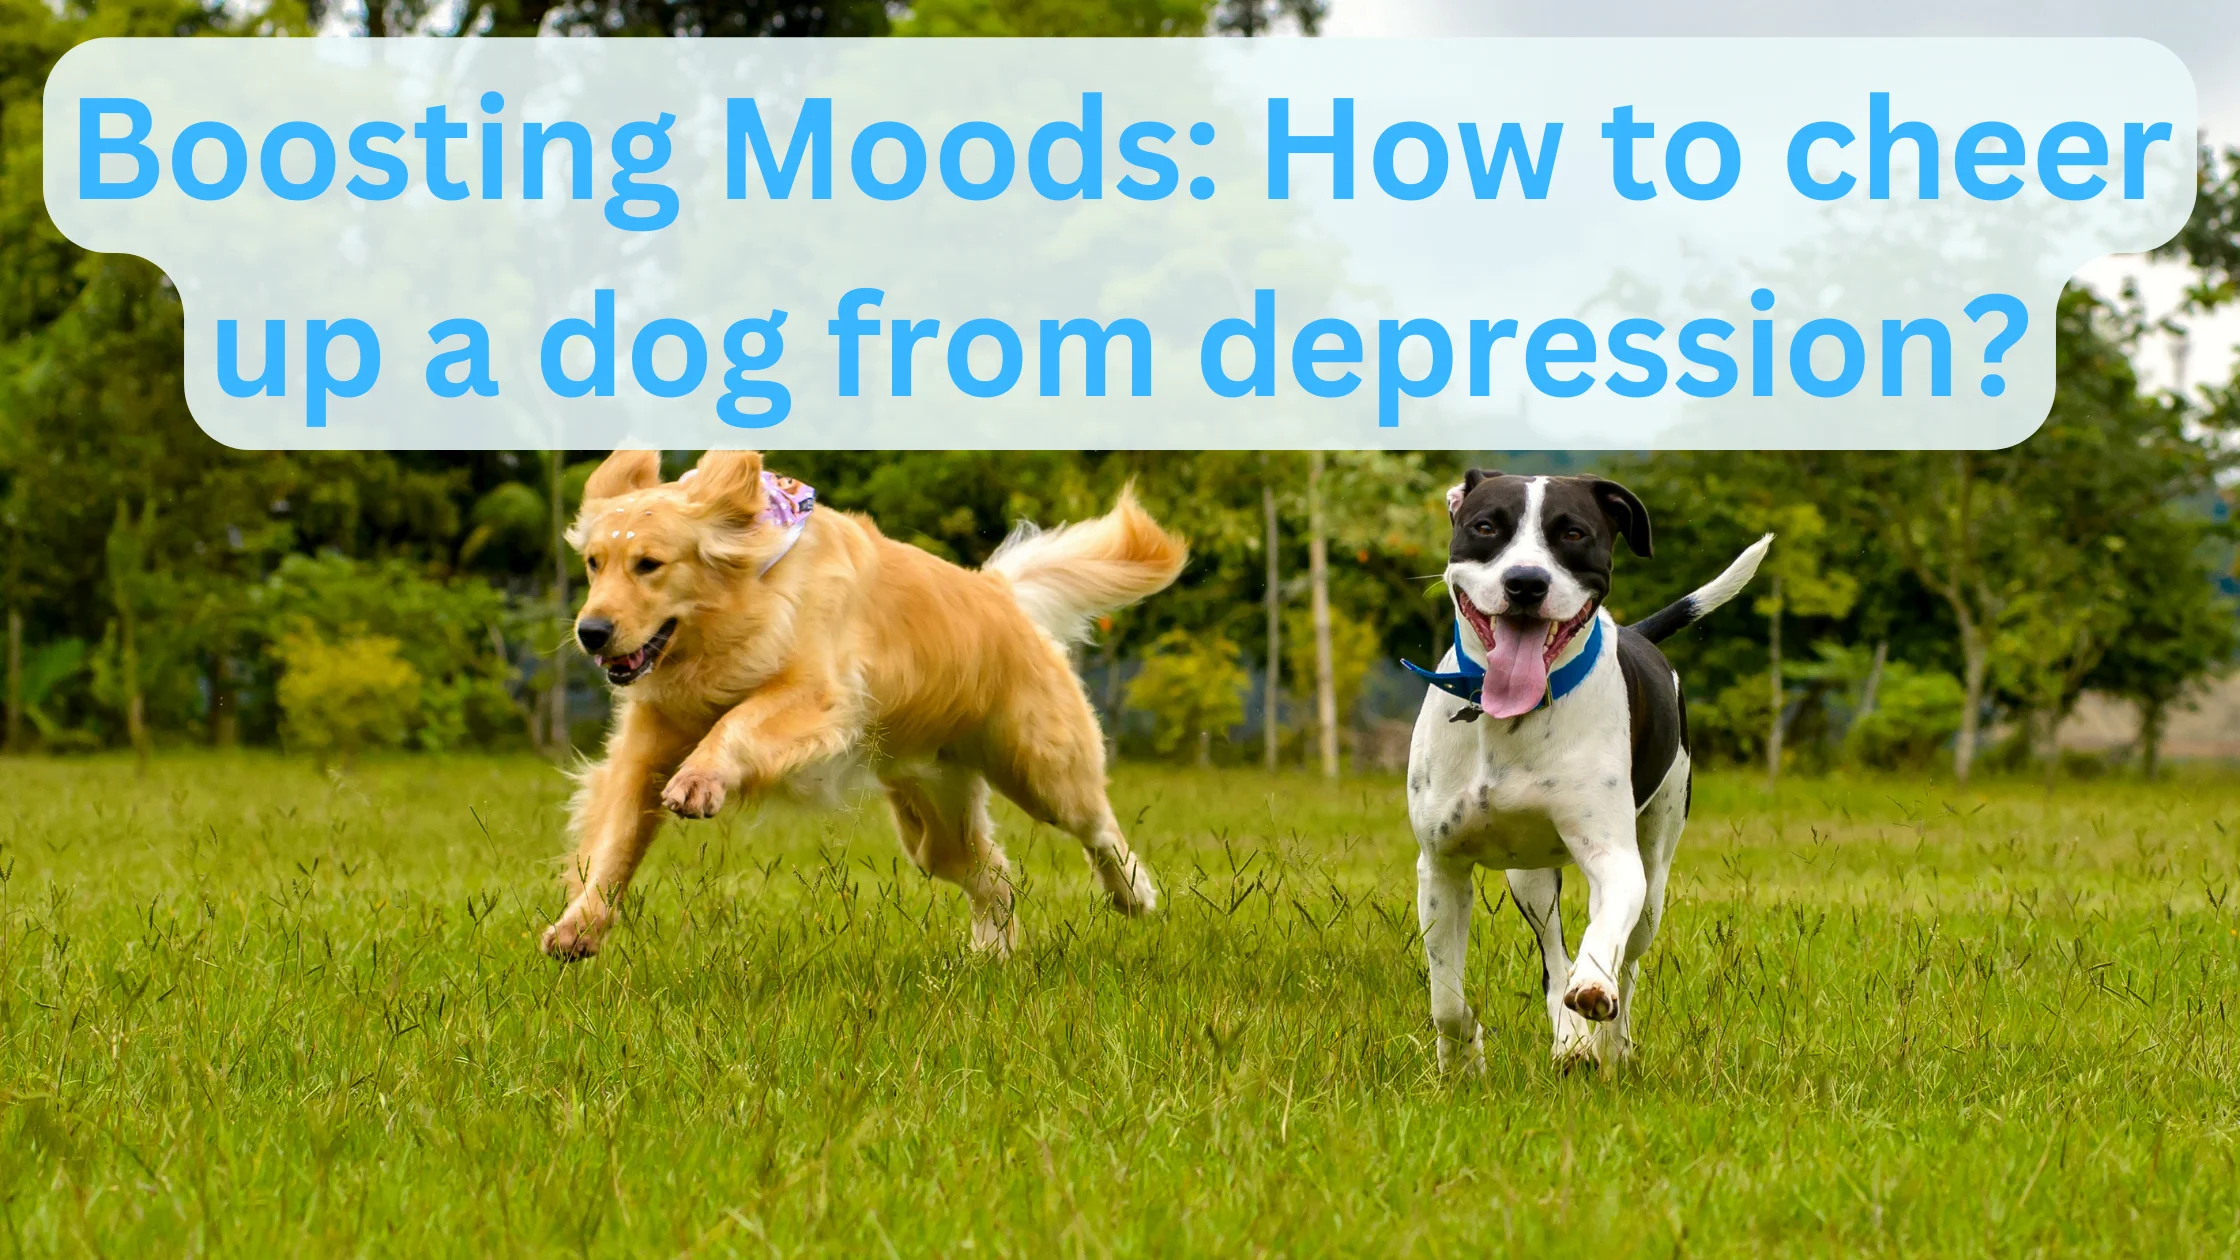 How to cheer up a dog from depression